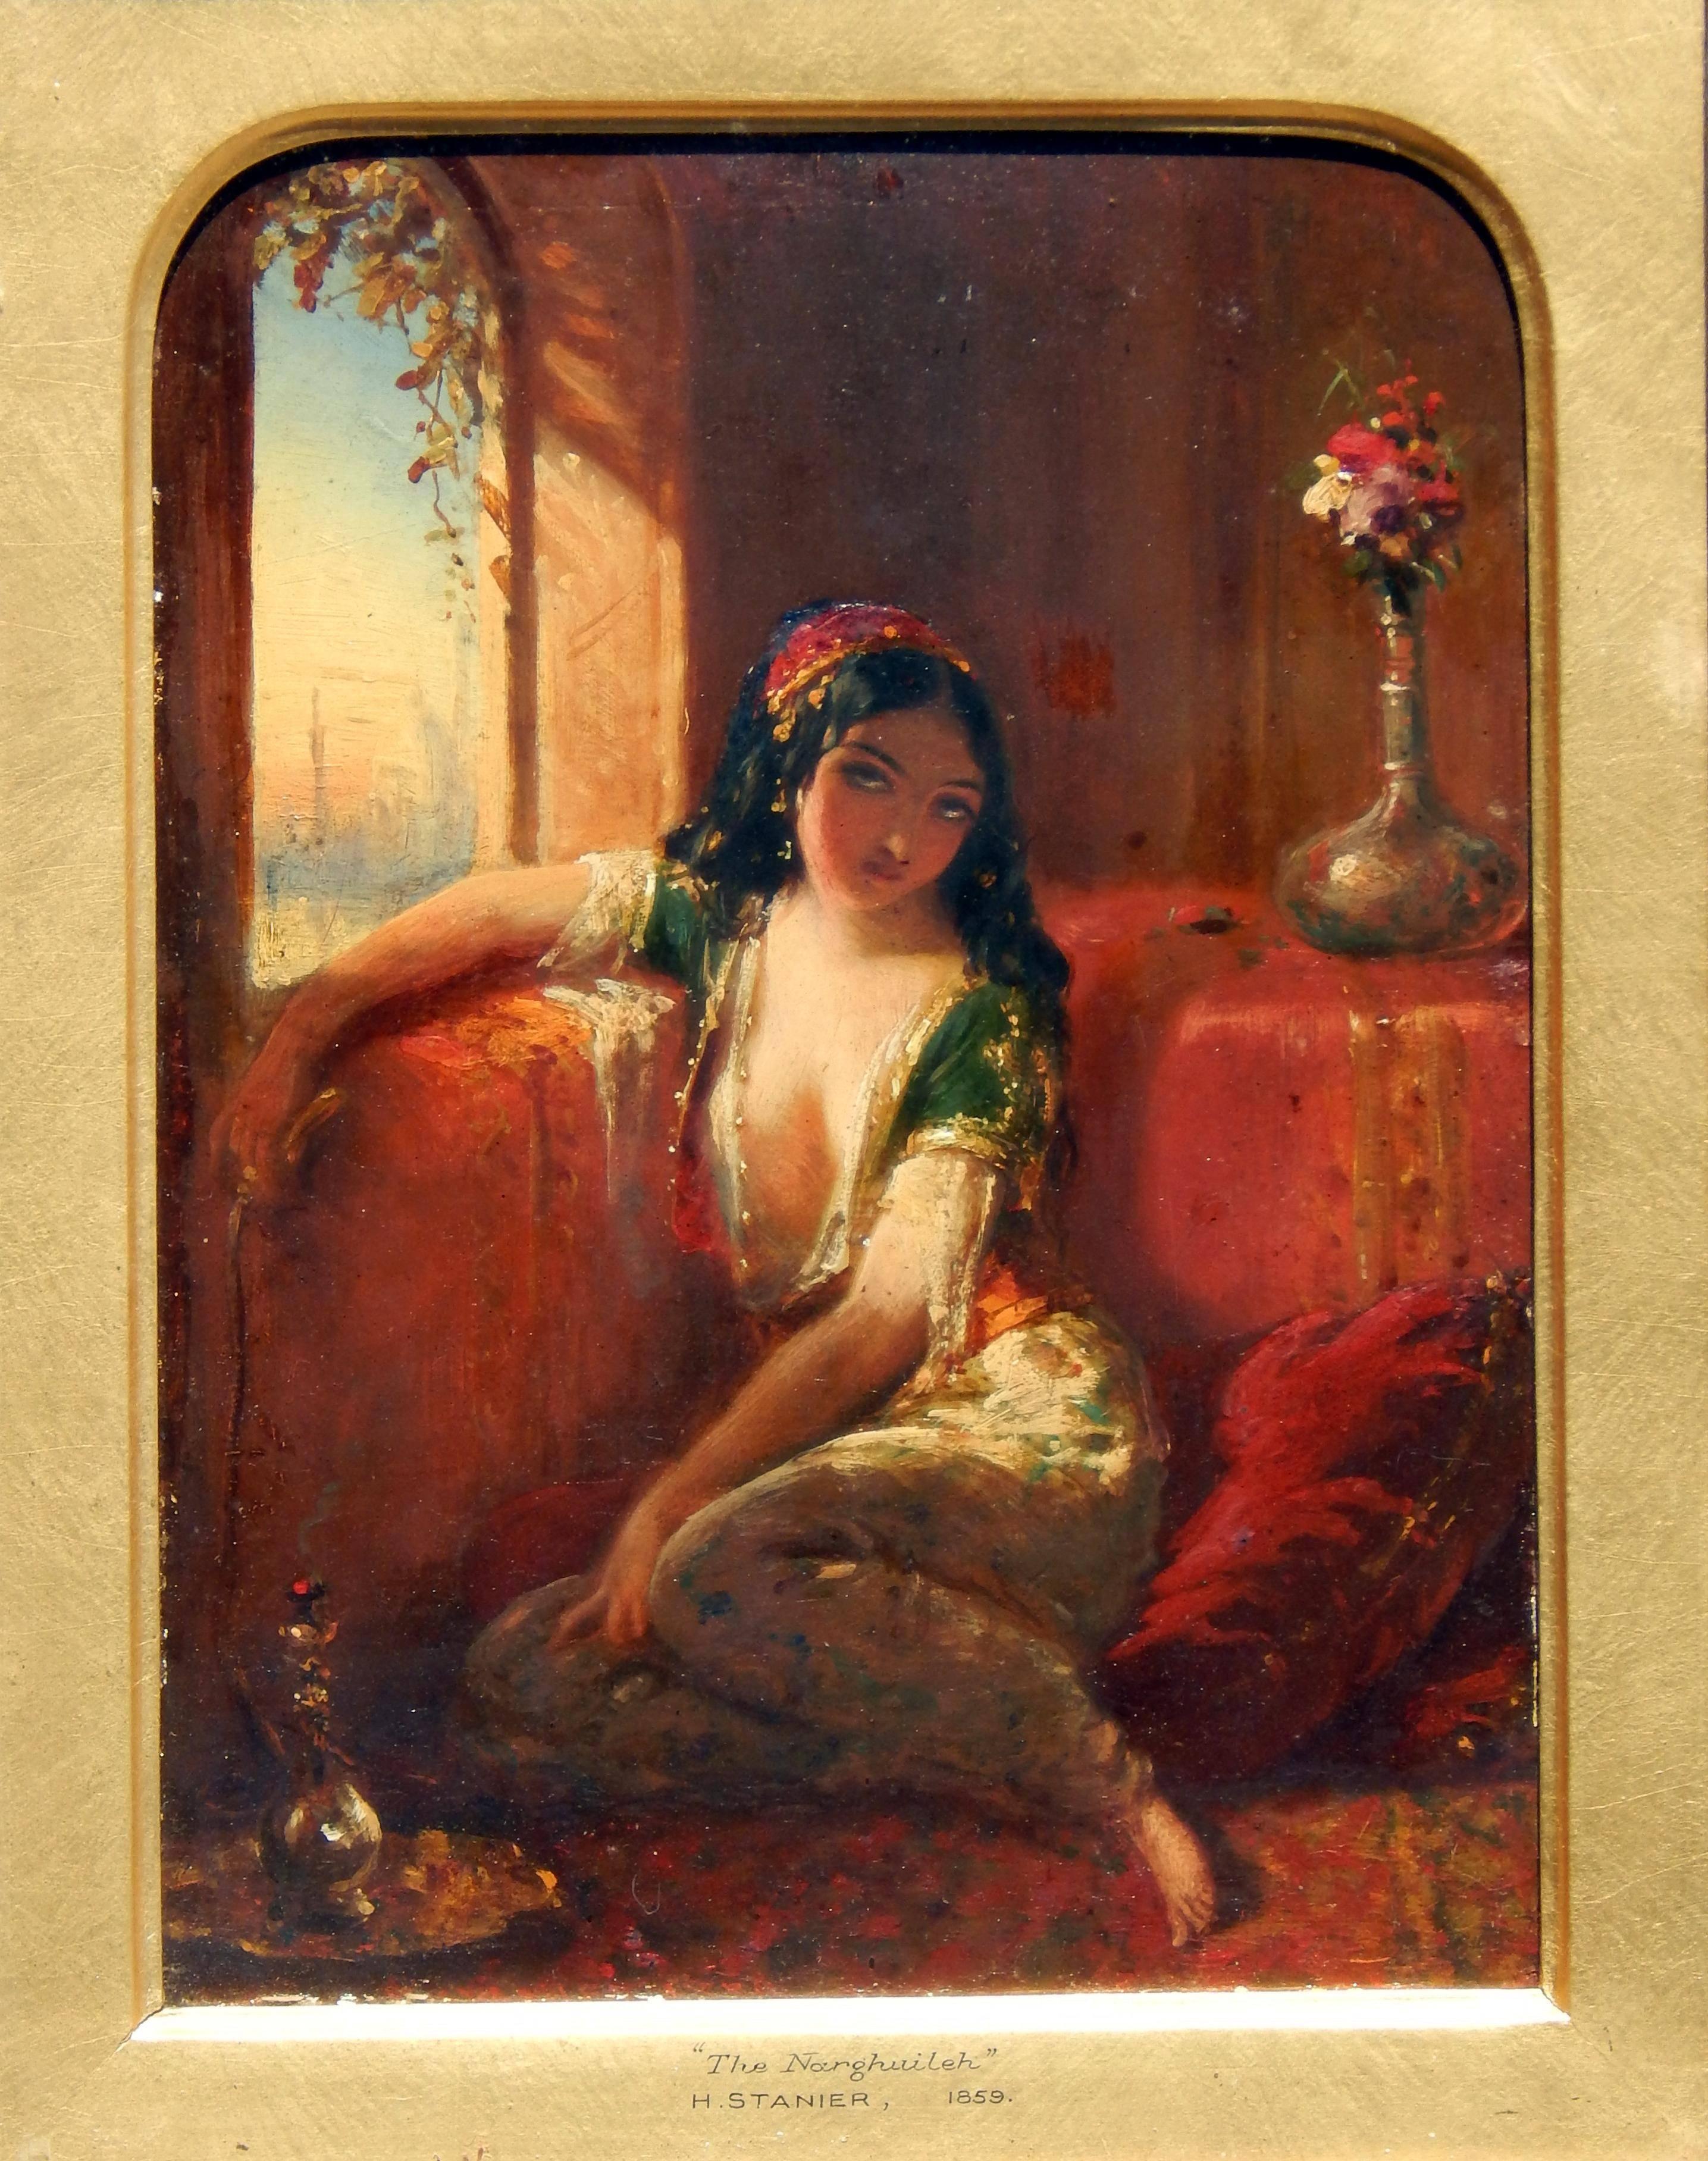 Orientalist oil on board by Henry Stanier (1831-1894) in the ornate original frame.
Titled “The Narghuileh” and dated 1859. 
Signed on the verso Stanier and initialed H.S.
Titled on the verso in the artist's hand.
Measures: 12